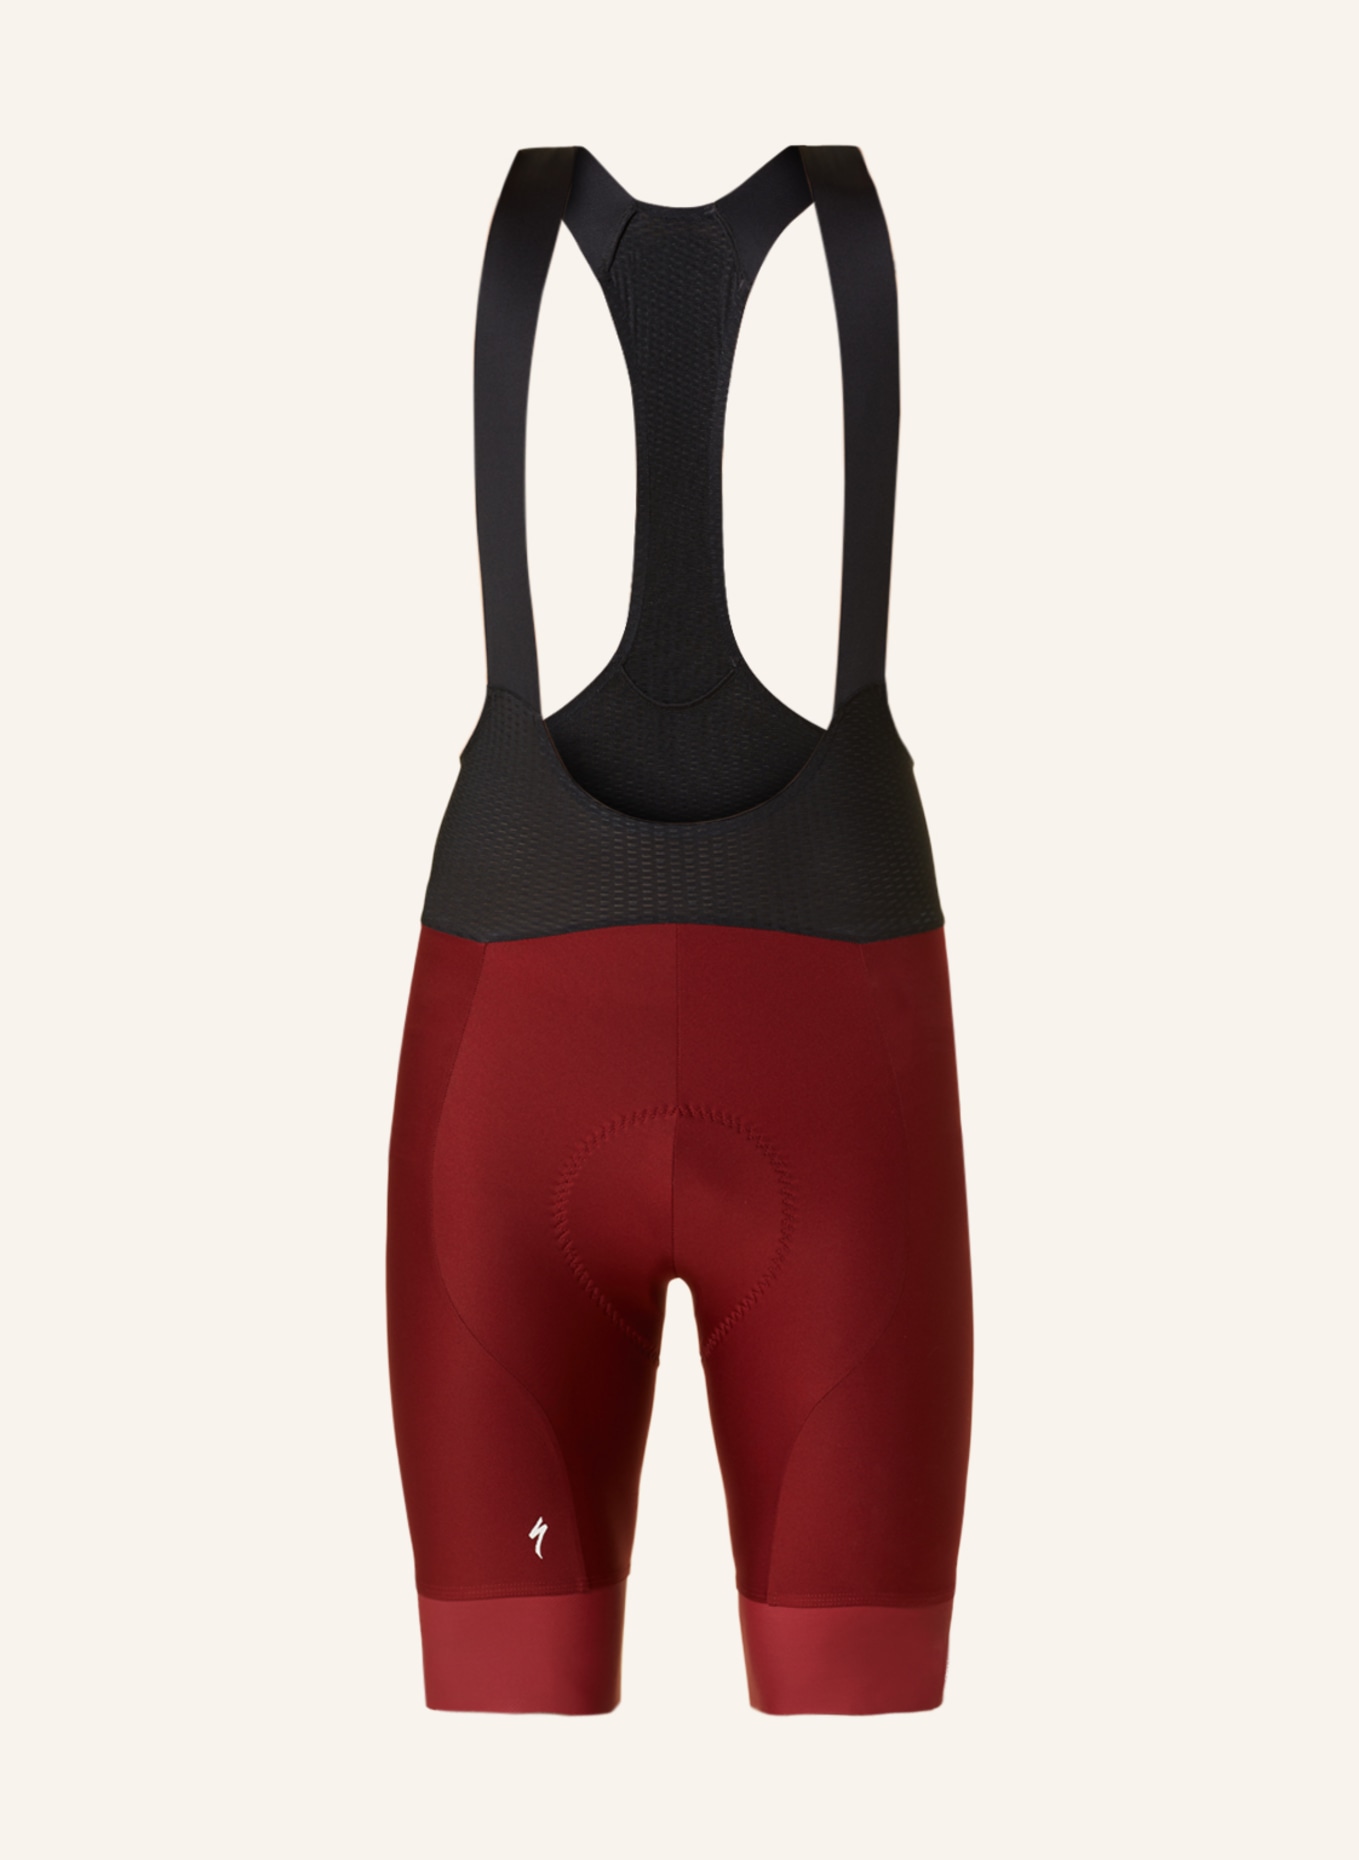 SPECIALIZED Cycling shorts SL RACE with straps and padded insert, Color: DARK RED/ BLACK (Image 1)